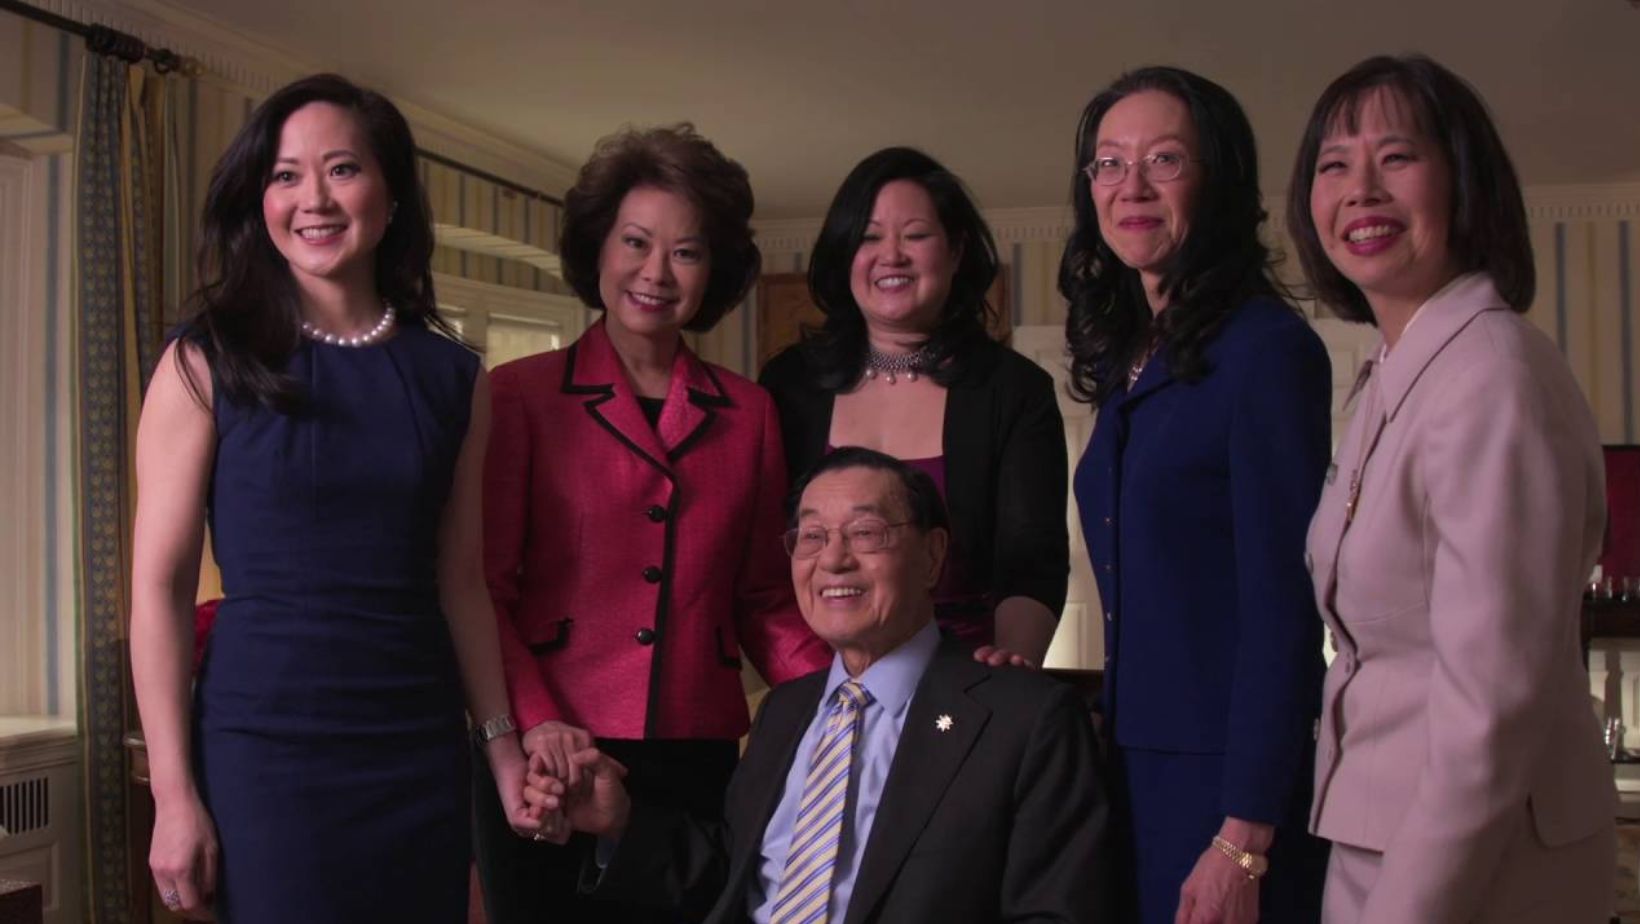 Angela Chao Siblings: Elaine, May Chao, Christine, Grace Chao, Jeannette Chao